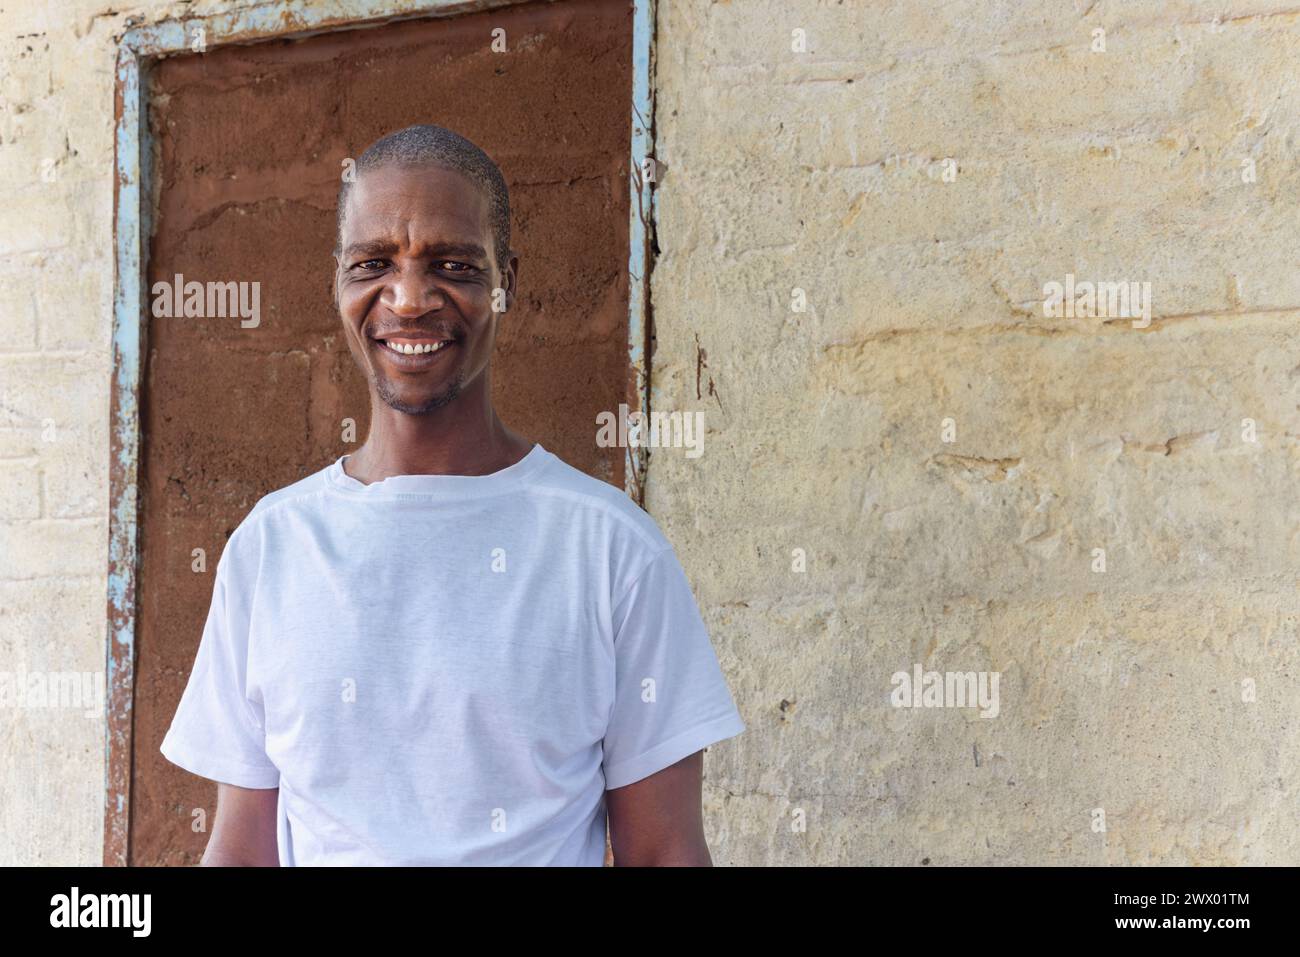 portrait of smiling african man standing next to a wall, village life Stock Photo